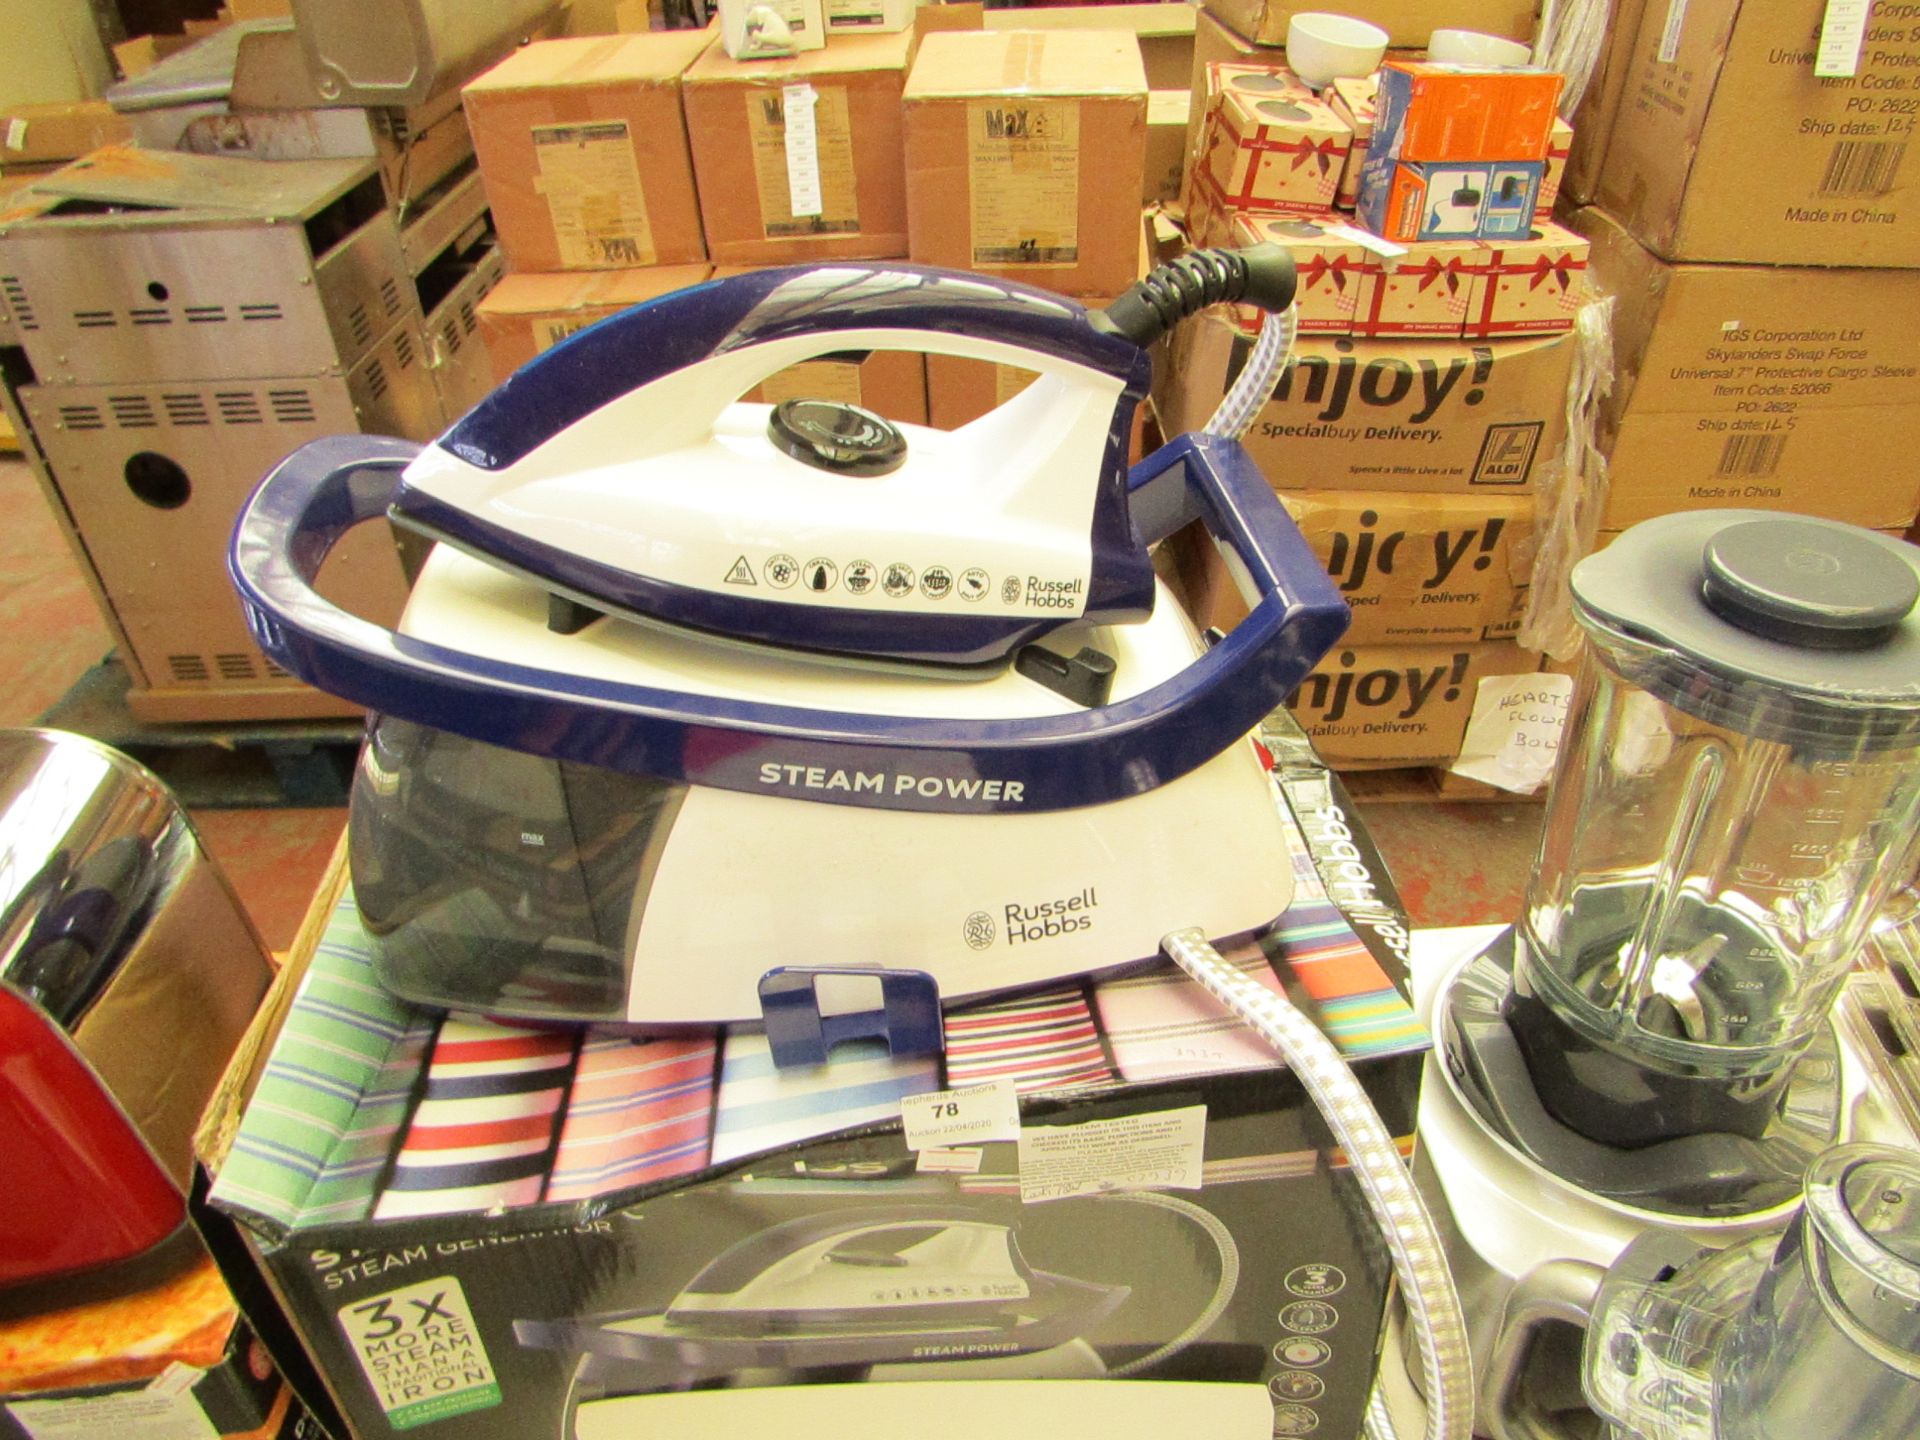 Russell Hobbs Steam power Generator iron, powers on and boxed.